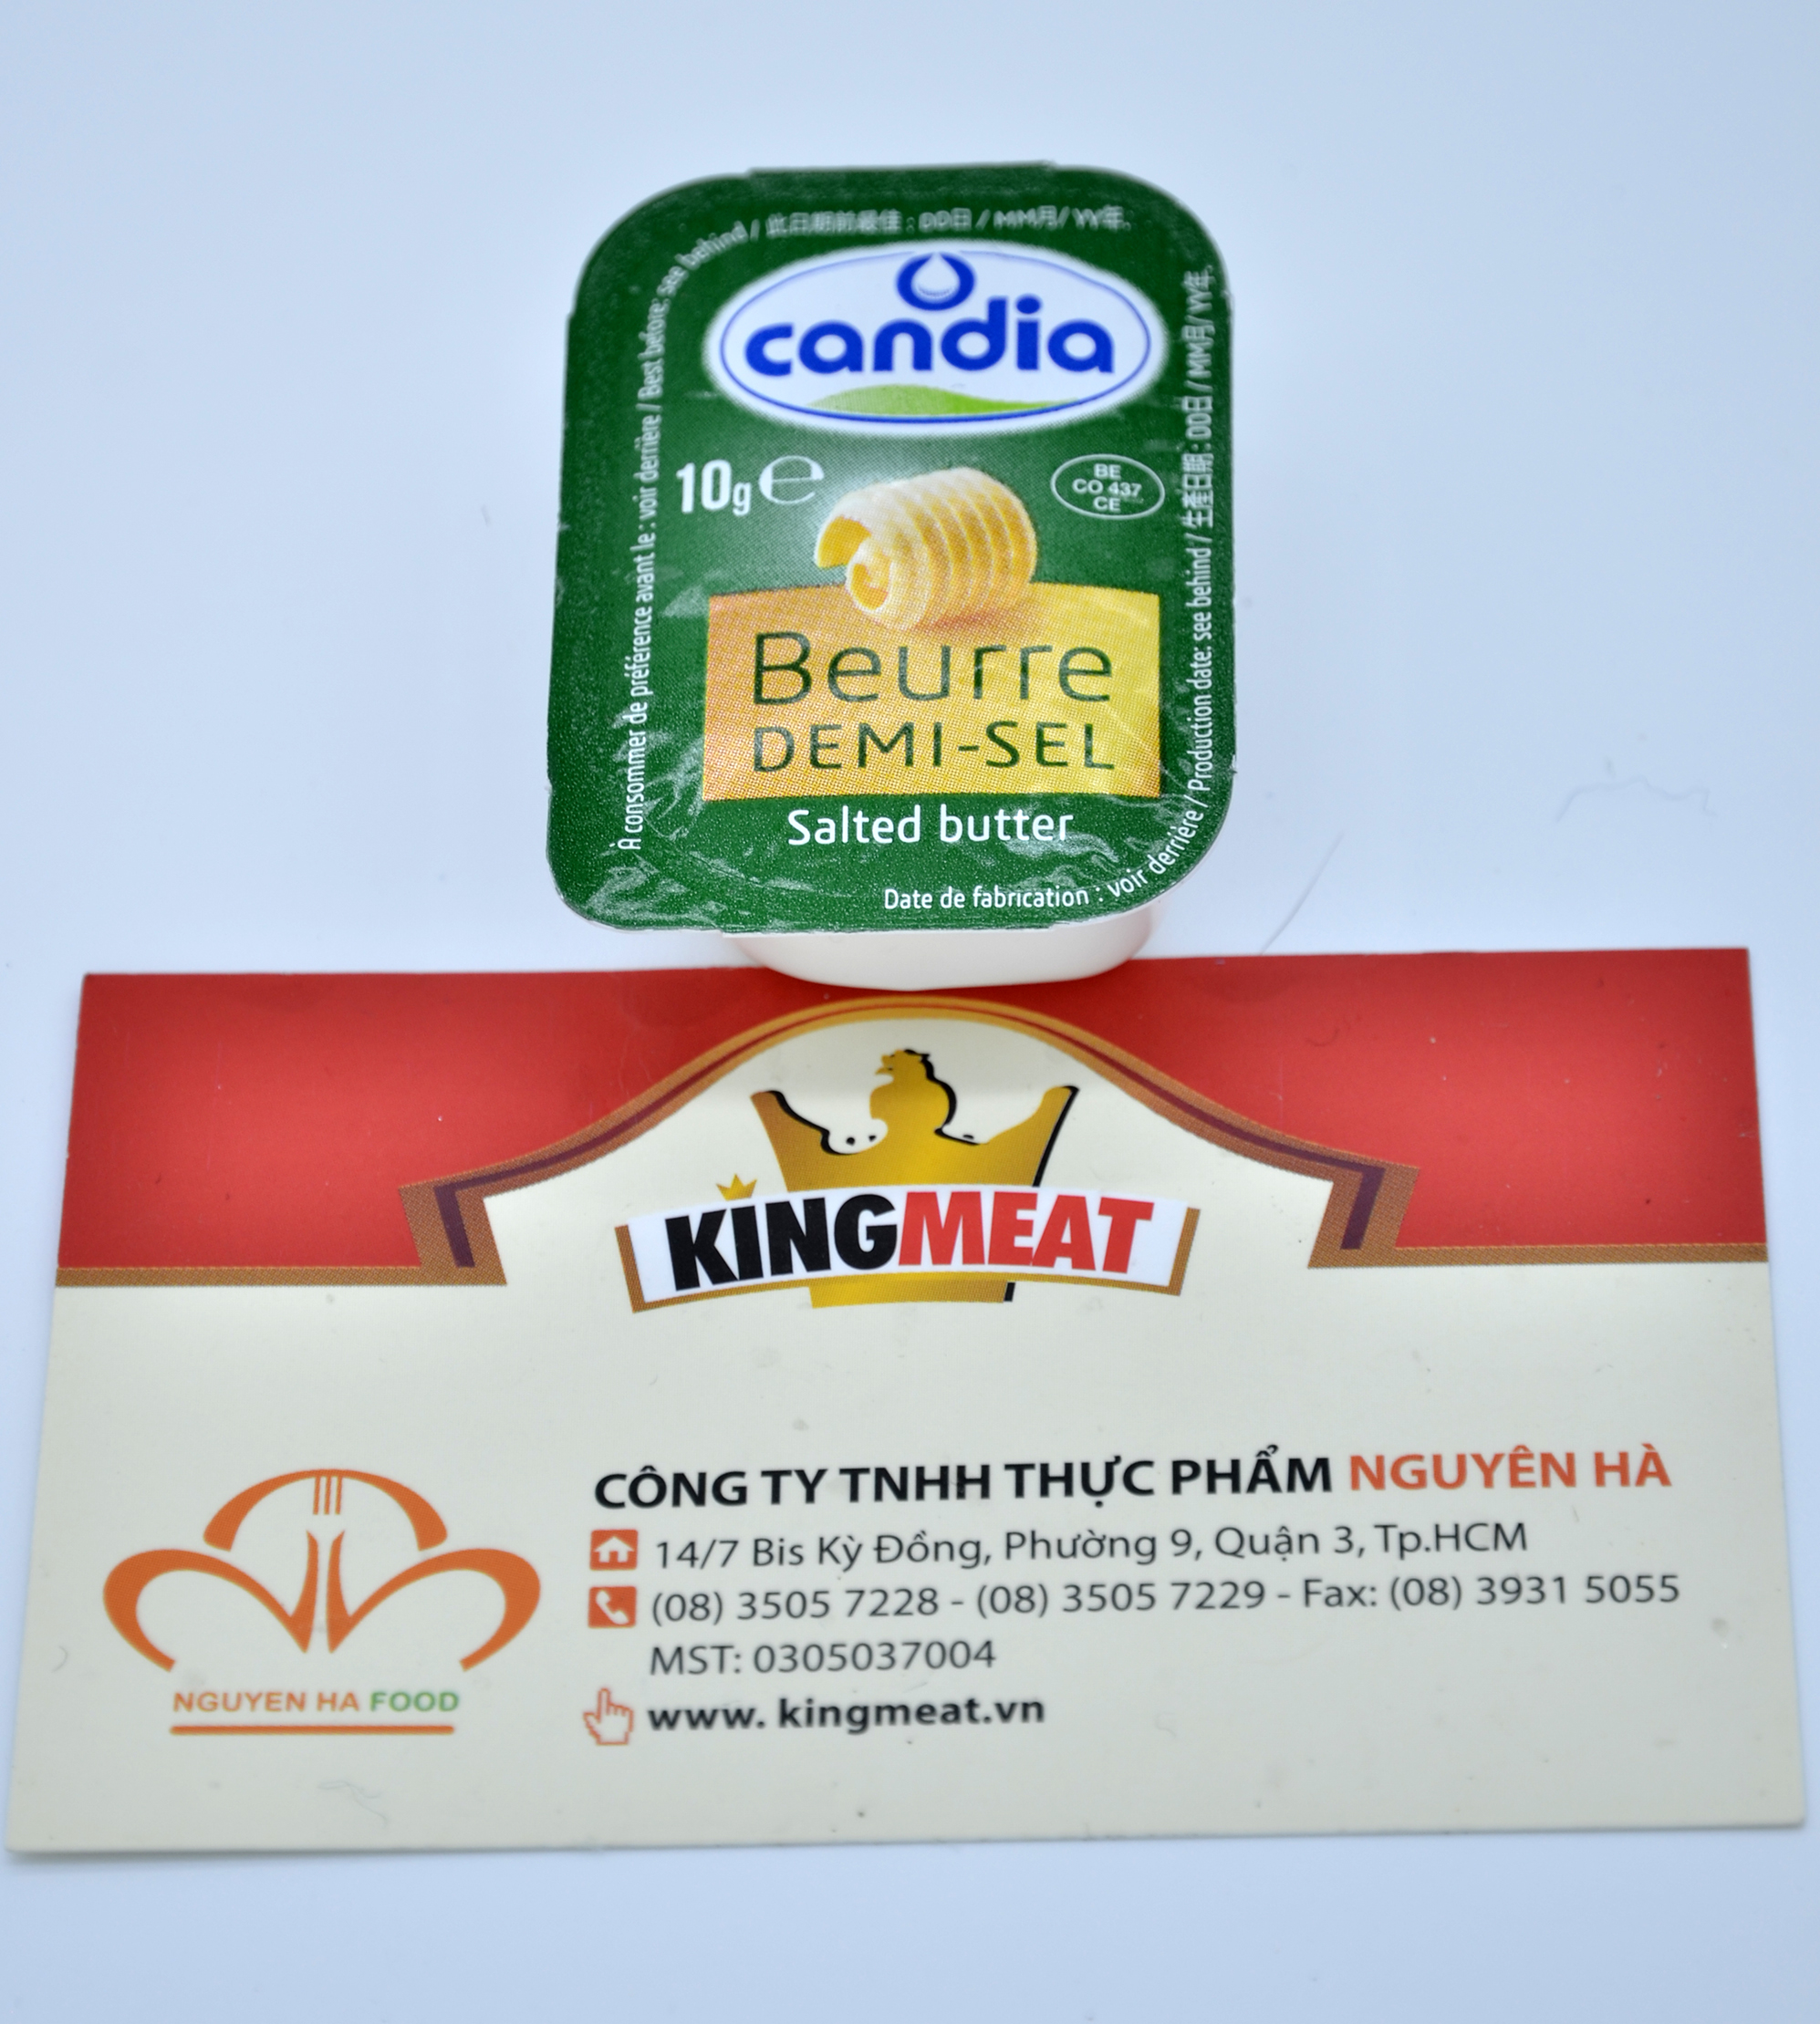 BƠ MẶN CANDIA 10G - CANDIA 82%UNSALTED BUTTER 10G CUP VSF